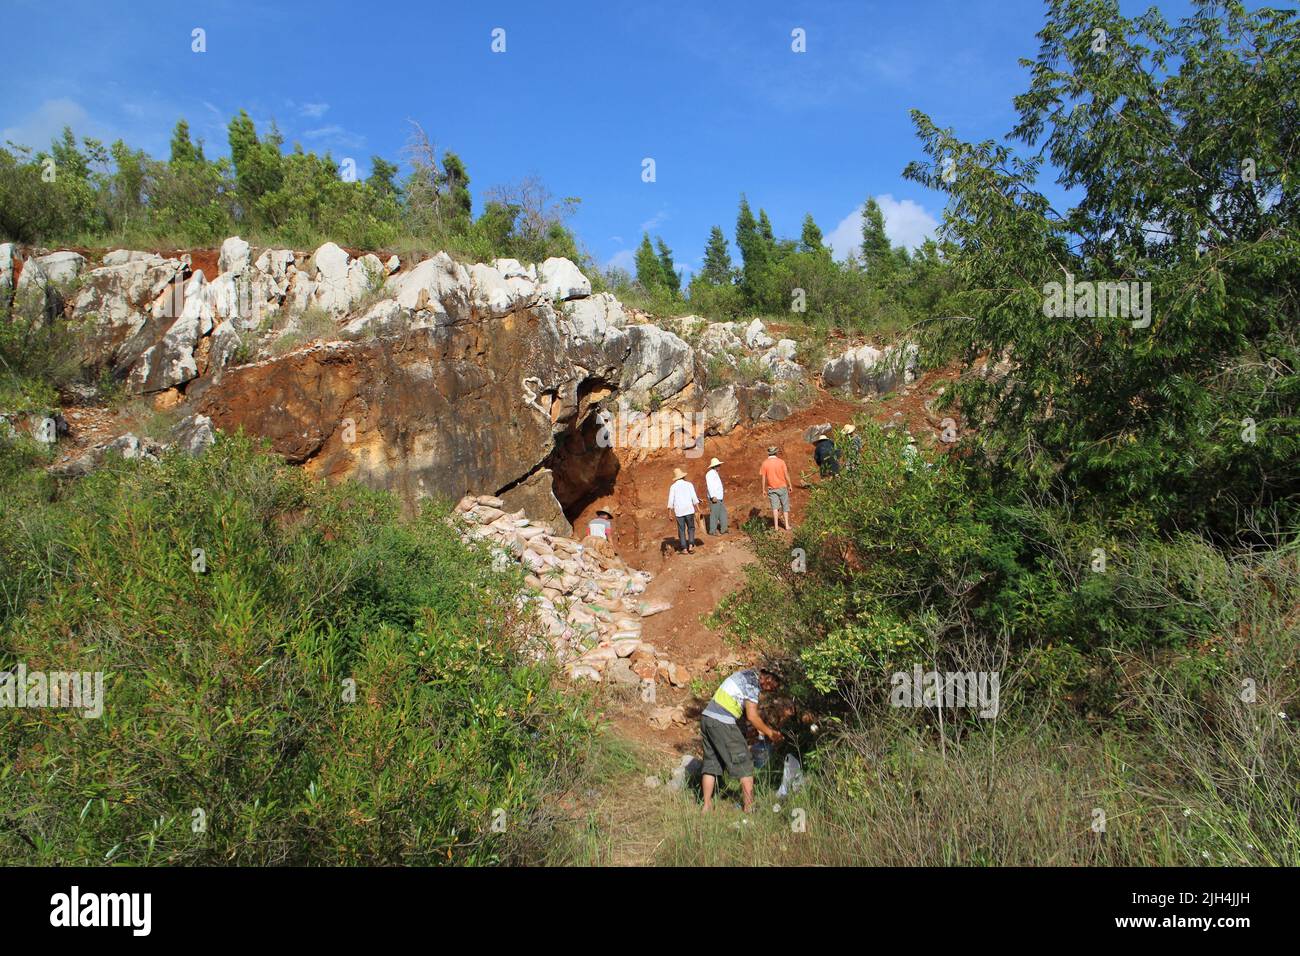 (220715) -- KUNMING, July 15, 2022 (Xinhua) -- Undated photo provided by Yunnan Institute of Cultural Relics and Archaeology shows a cave where the remains of the 'Mengzi Ren (MZR)' are unearthed, in Mengzi, southwest China's Yunnan Province. Scientists have unveiled a Late Pleistocene human genome from southwest China. Their findings were published online in the journal Current Biology on Thursday night. The scientists conducted the genome sequencing of the 14,000-year-old human remains of the 'Mengzi Ren (MZR),' which were unearthed in 1989 in a cave in Mengzi, Yunnan Province. More than 3 Stock Photo